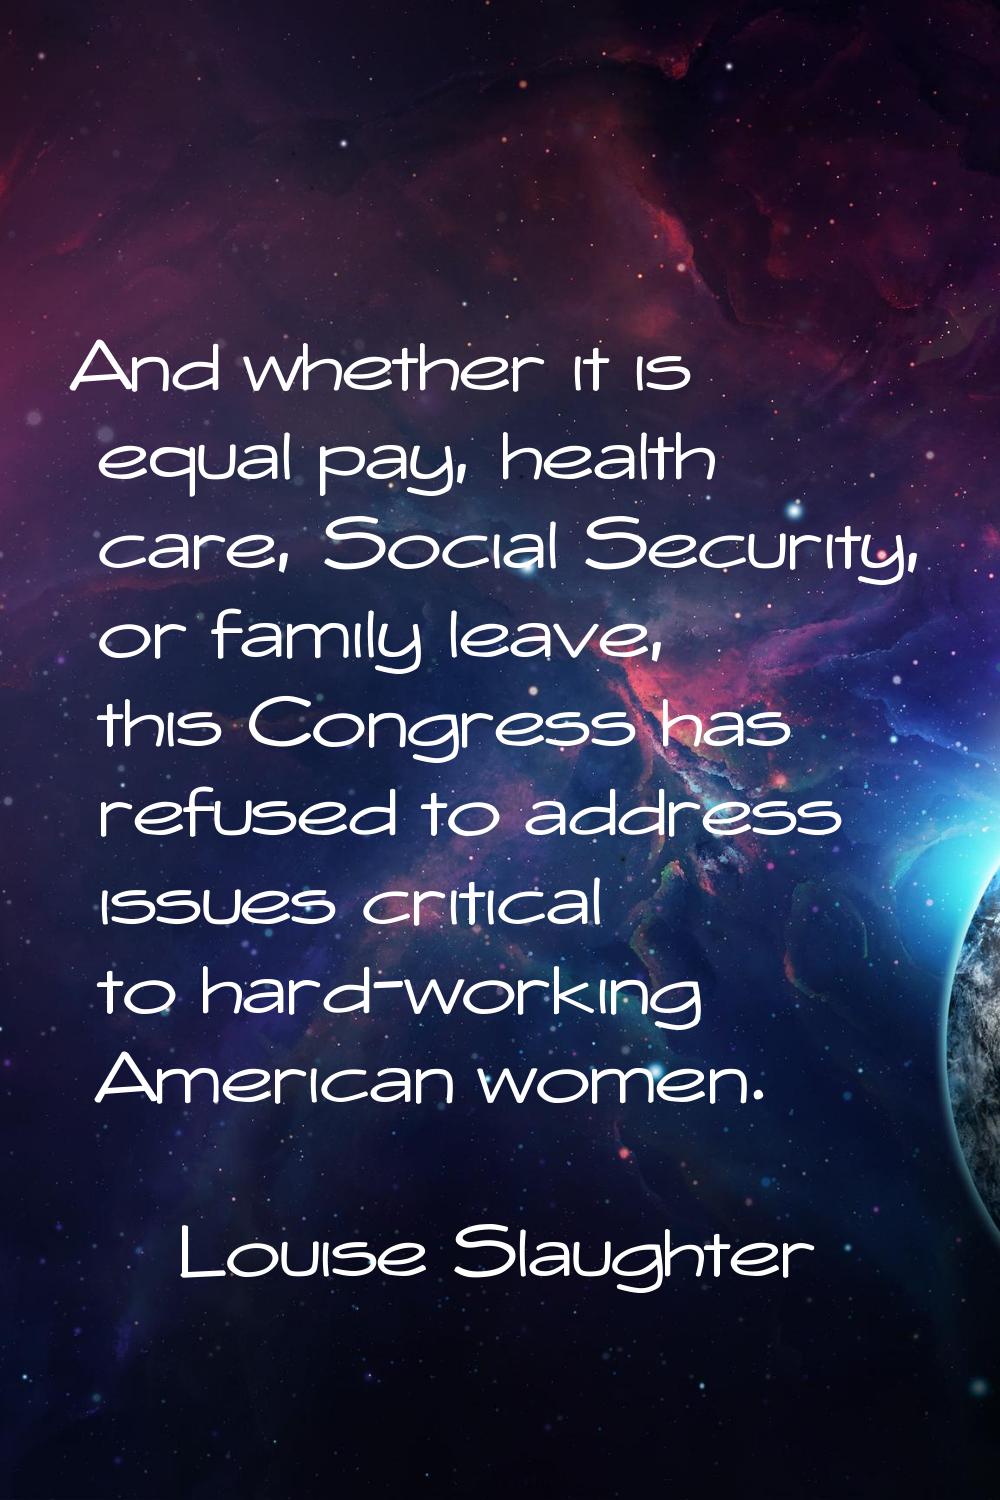 And whether it is equal pay, health care, Social Security, or family leave, this Congress has refus